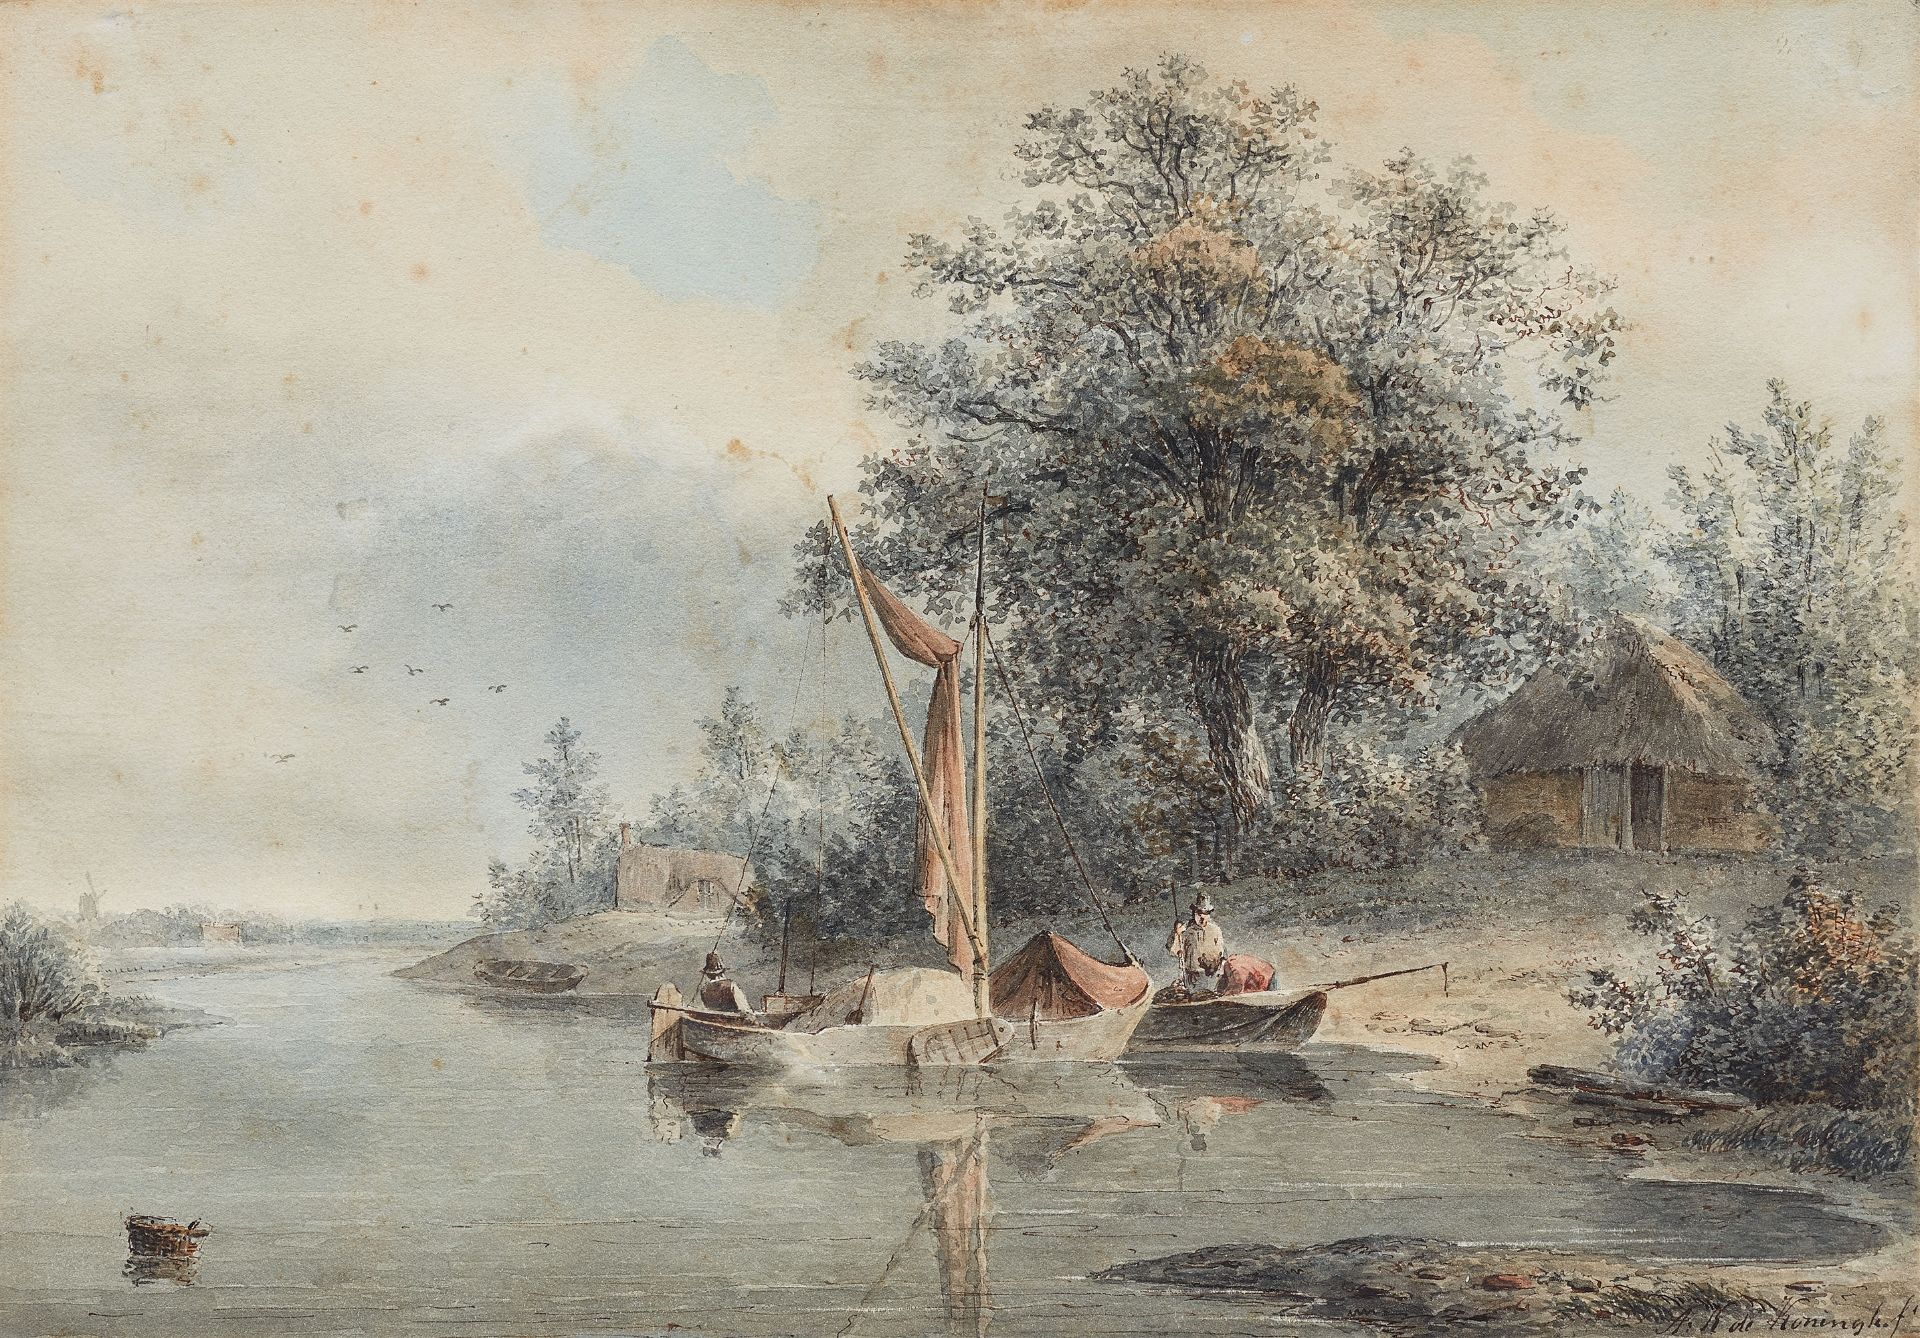 Arie Ketting de Koningh, River Landscape with Two Boats and House